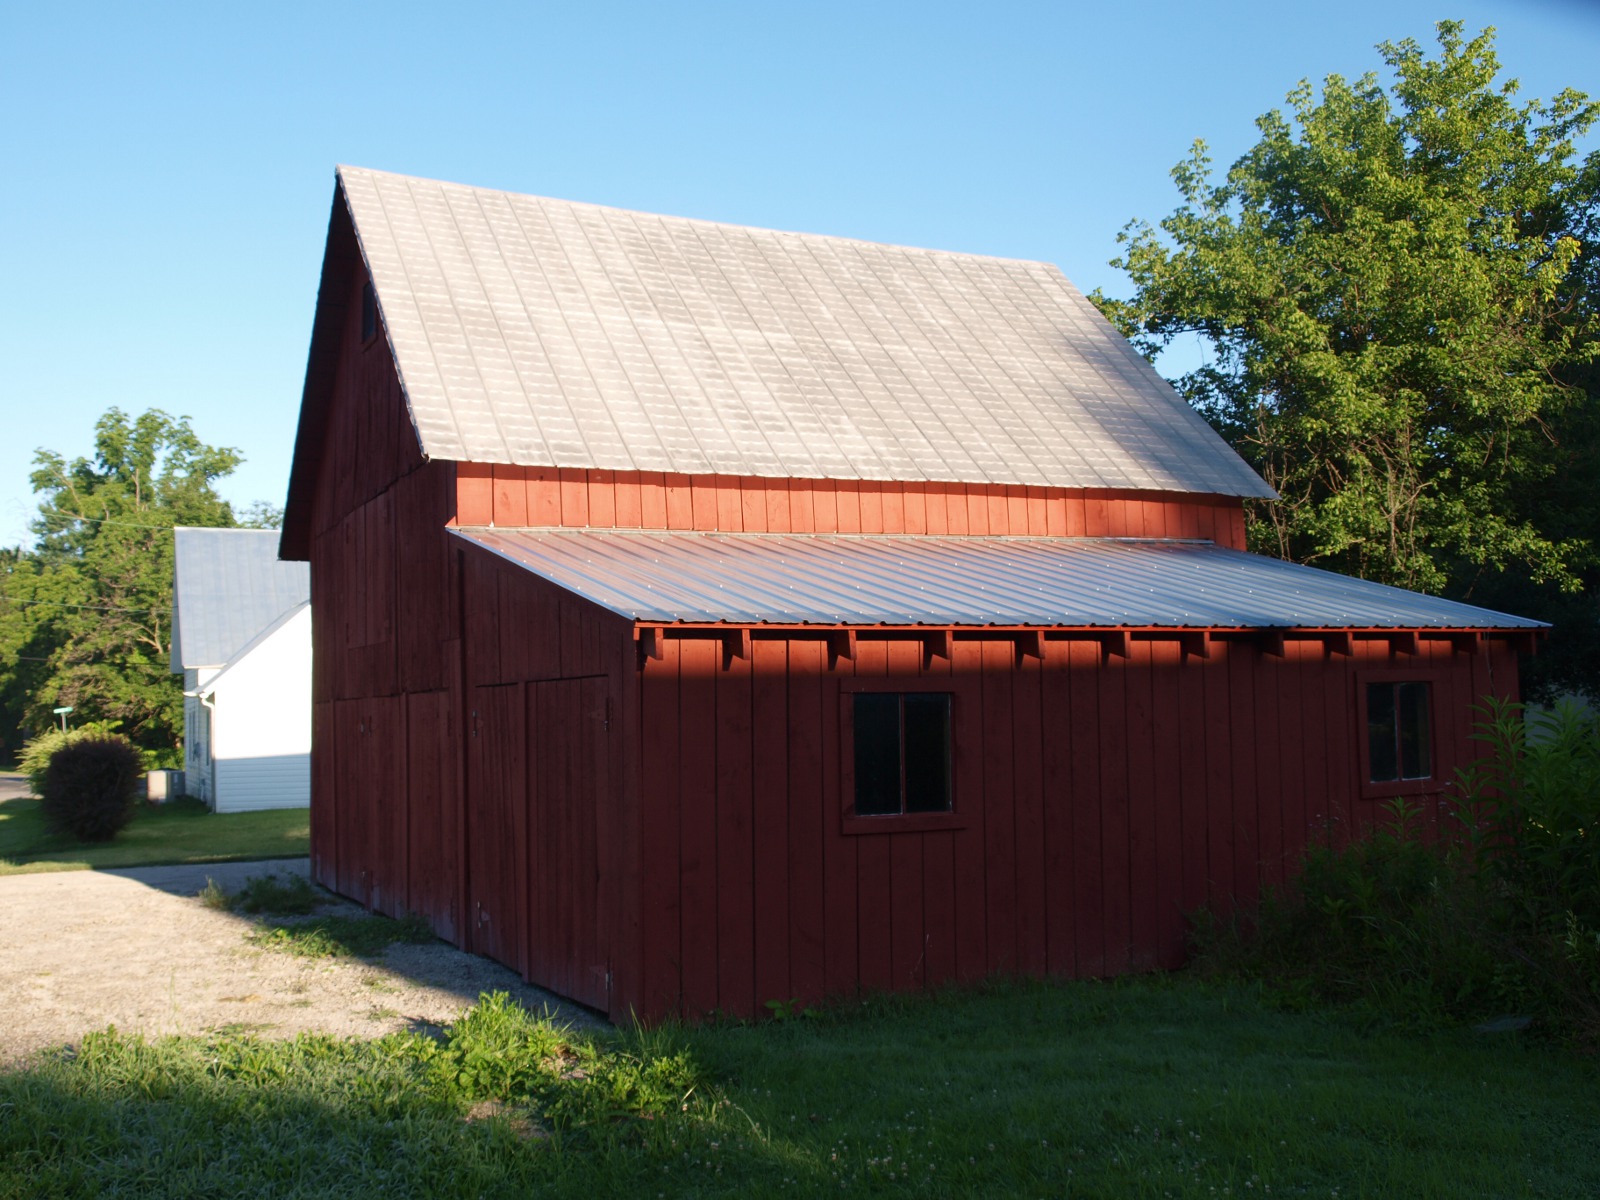 Savacoal Barn, at the corner of Boston Mills & Stanford Roads, is one of many once-decaying structures that gave rise to stories of the 'slaughter house'.